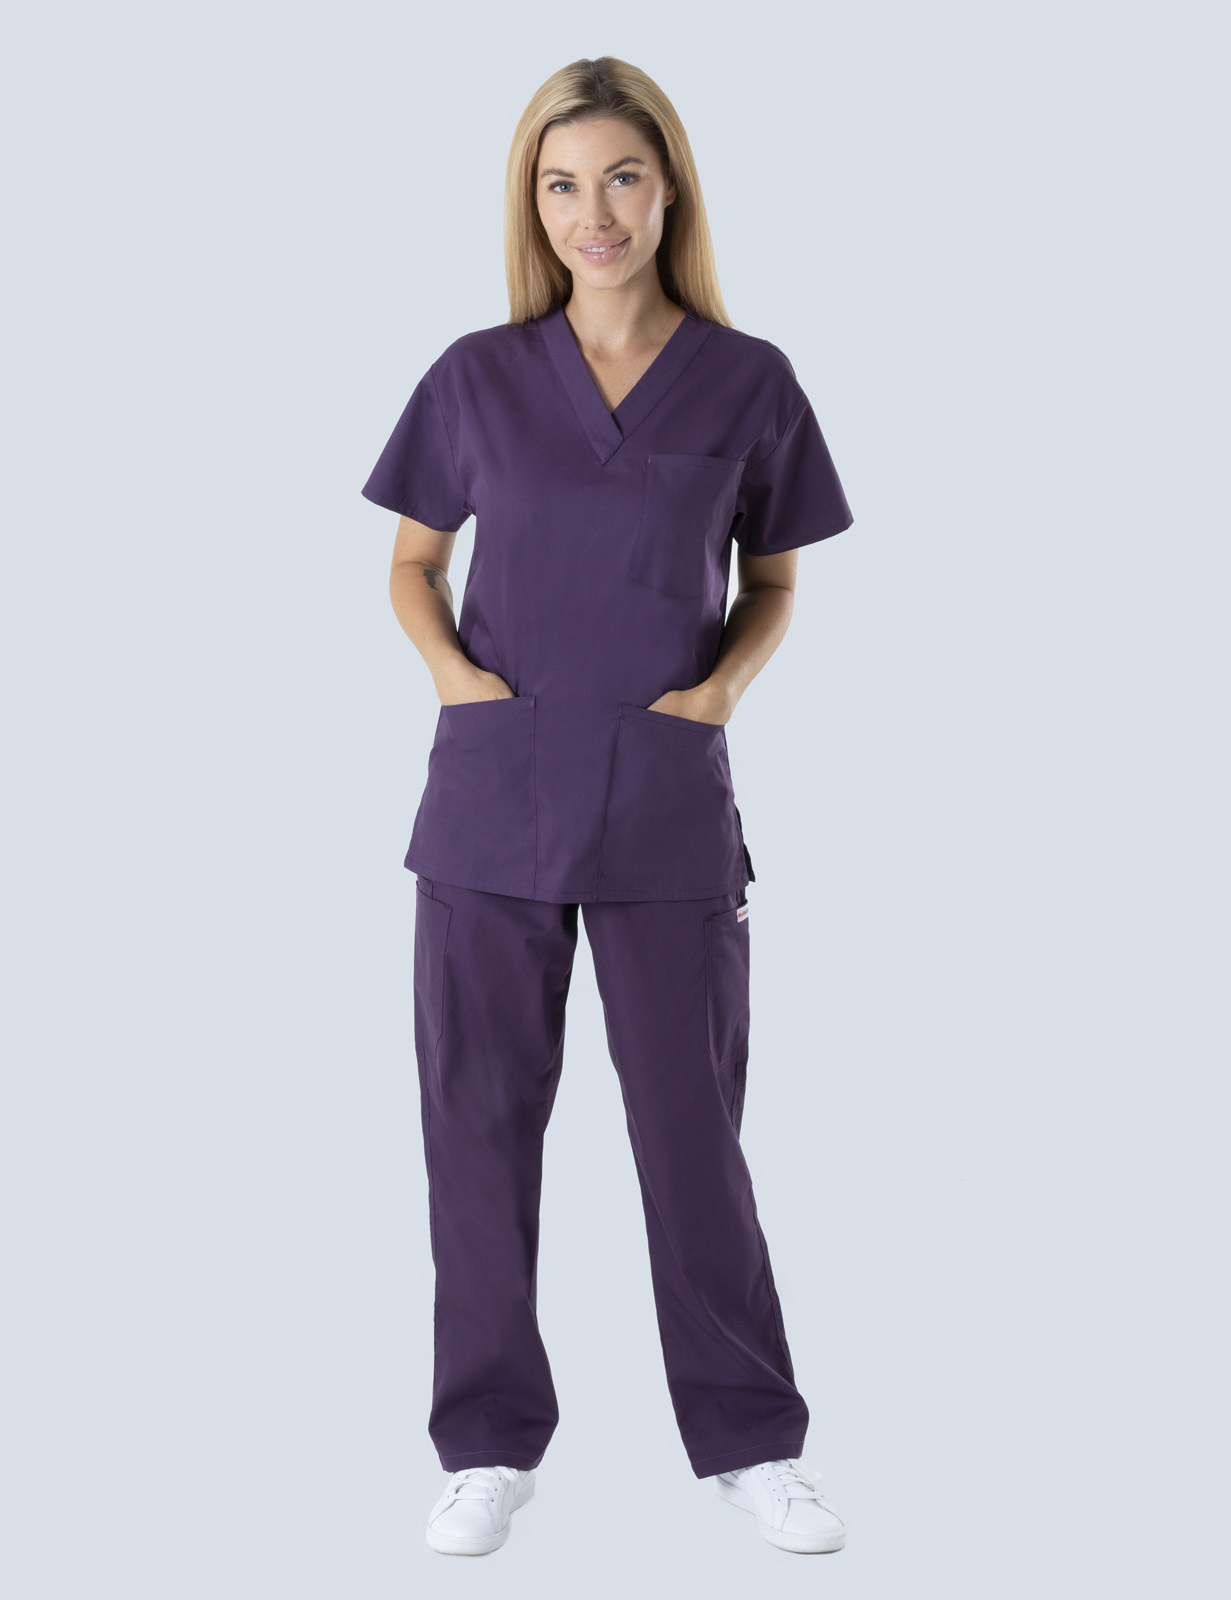 Caboolture Hospital - ED CN (4 Pocket Scrub Top and Cargo Pants in Aubergine incl Logos)